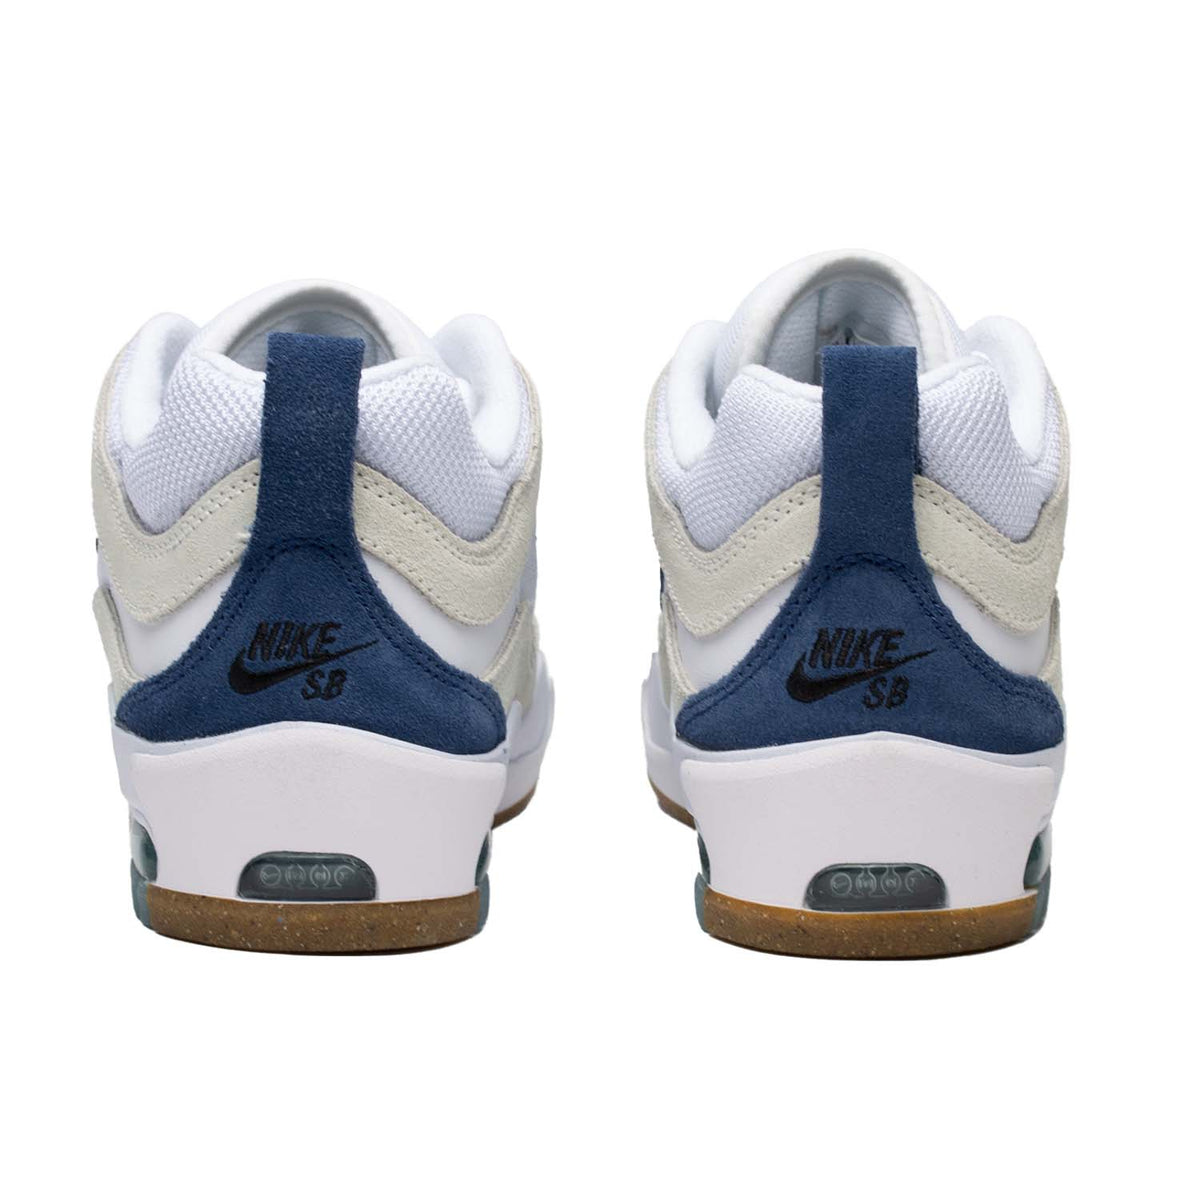 Nike SB - Air Max Ishod: &#39;90s basketball-inspired, durable for intense skating, Max Air technology, flexible cupsole, &quot;Ishod&quot; details, &quot;Wair&quot; embroidery, herringbone outsole grip, White/Summit White/Black/Navy, Tinker Hatfield&#39;s Parisian architecture influence for comfort and support.